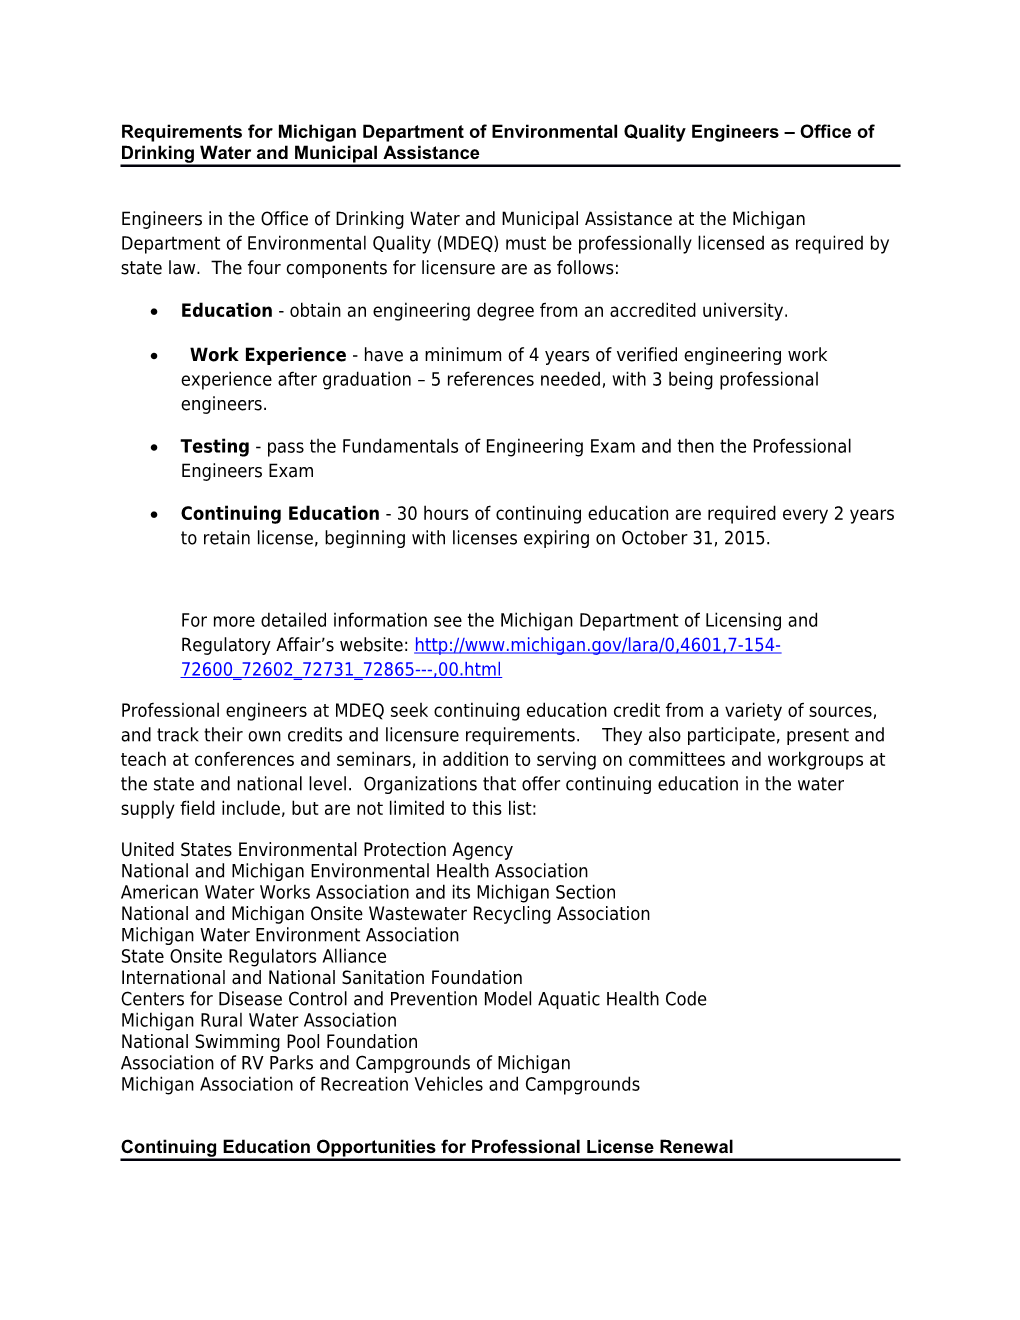 Requirements for Michigan Department of Environmental Quality Engineers Office of Drinking